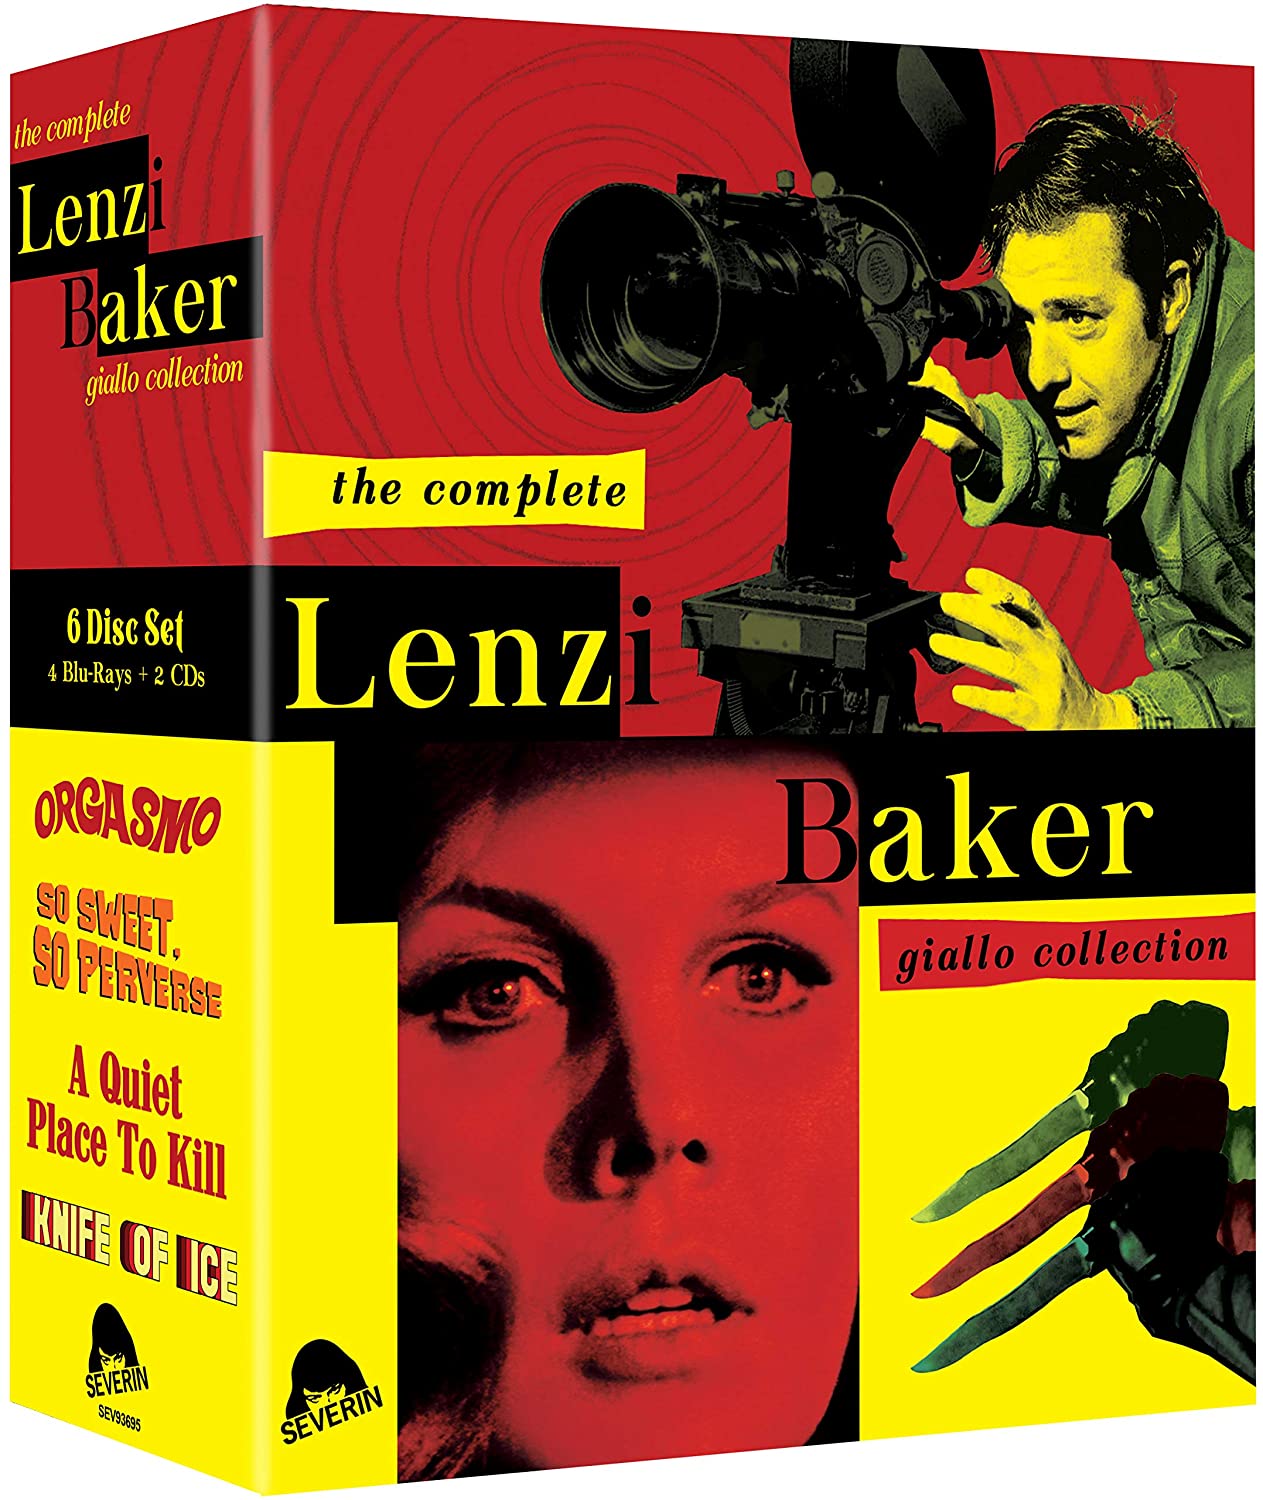 The Complete Lenzi/baker Giallo Collection (Limited Edition) Blu-Ray/cd Blu-Ray